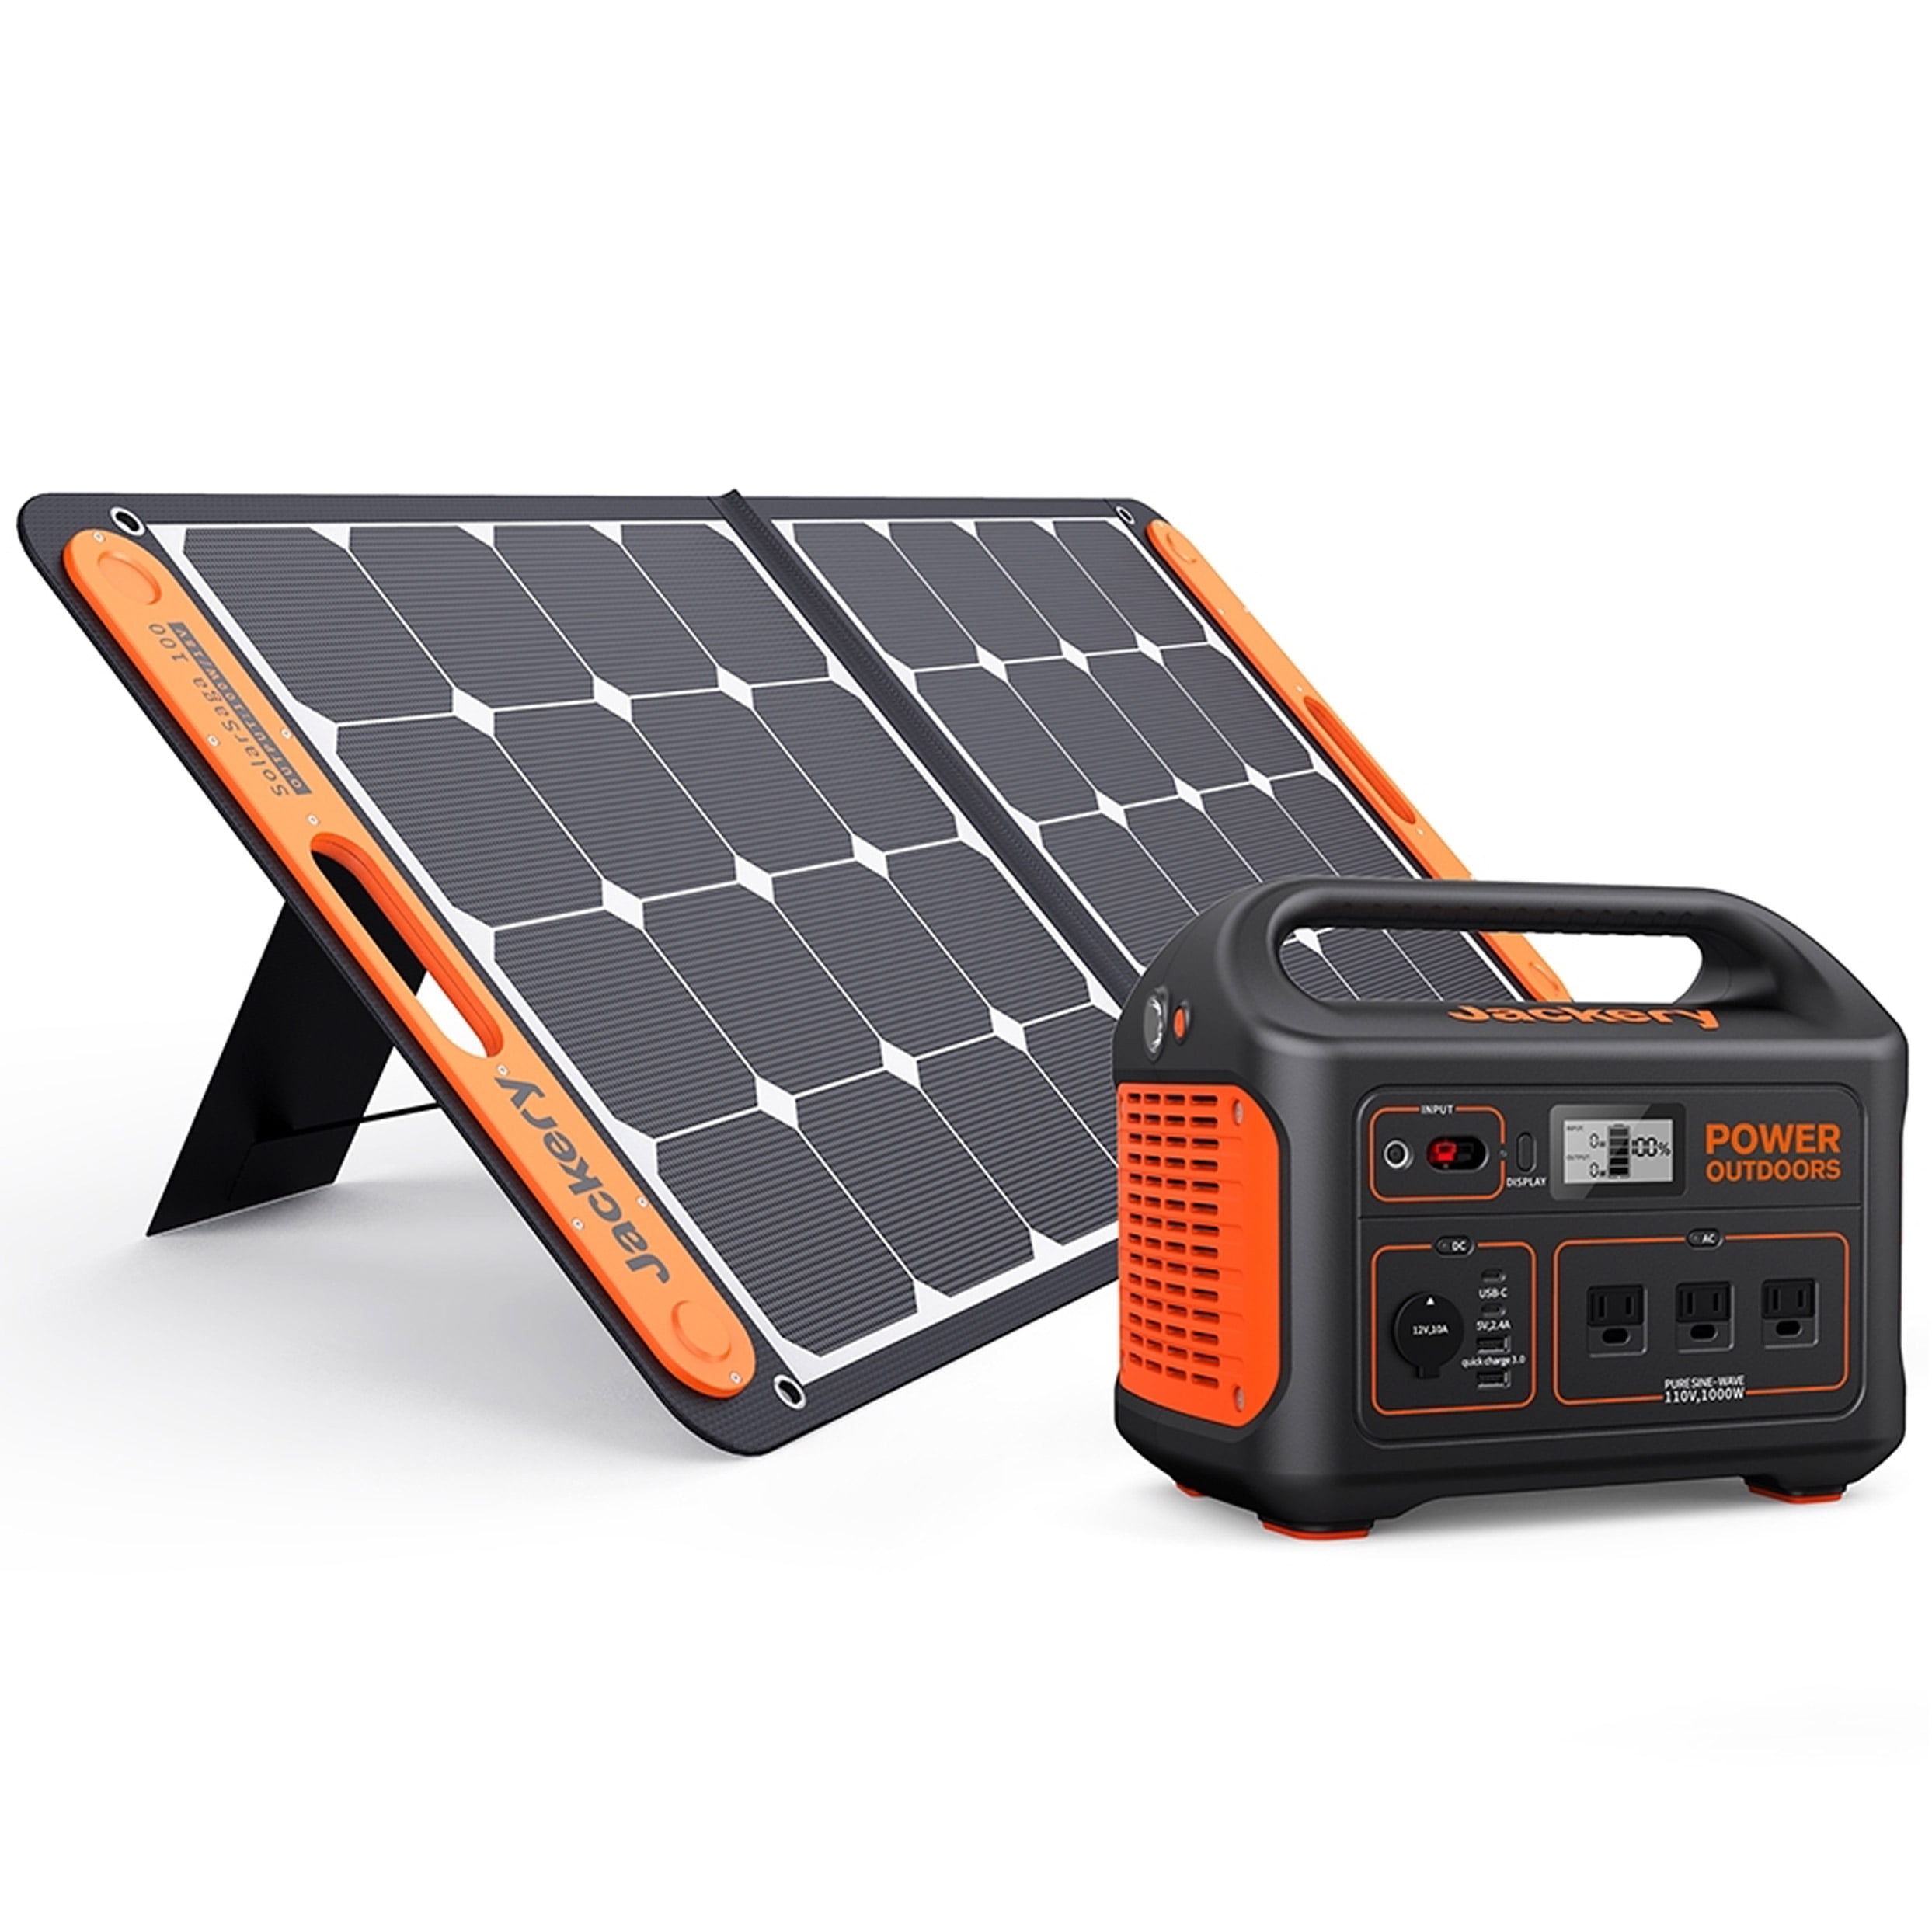 Aferiy 2000w Power Bank & Solar Panels - AMAZING Value - £/Power! Full  Review & Test 